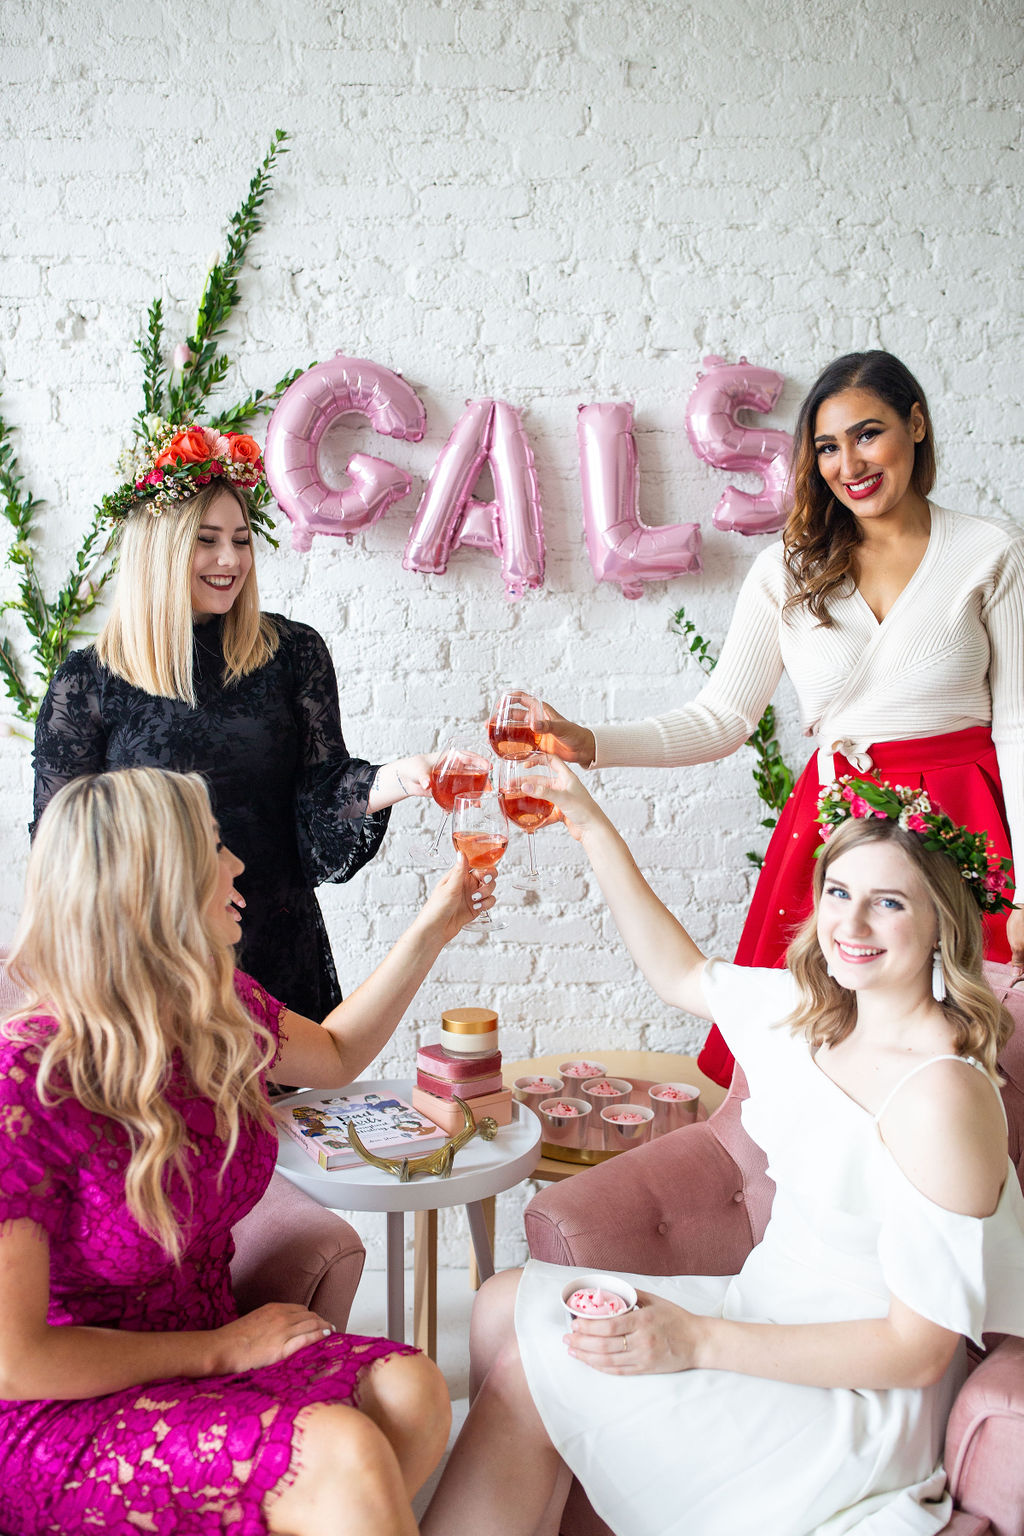 Valentine's/Galentine's Day Outfit Ideas!